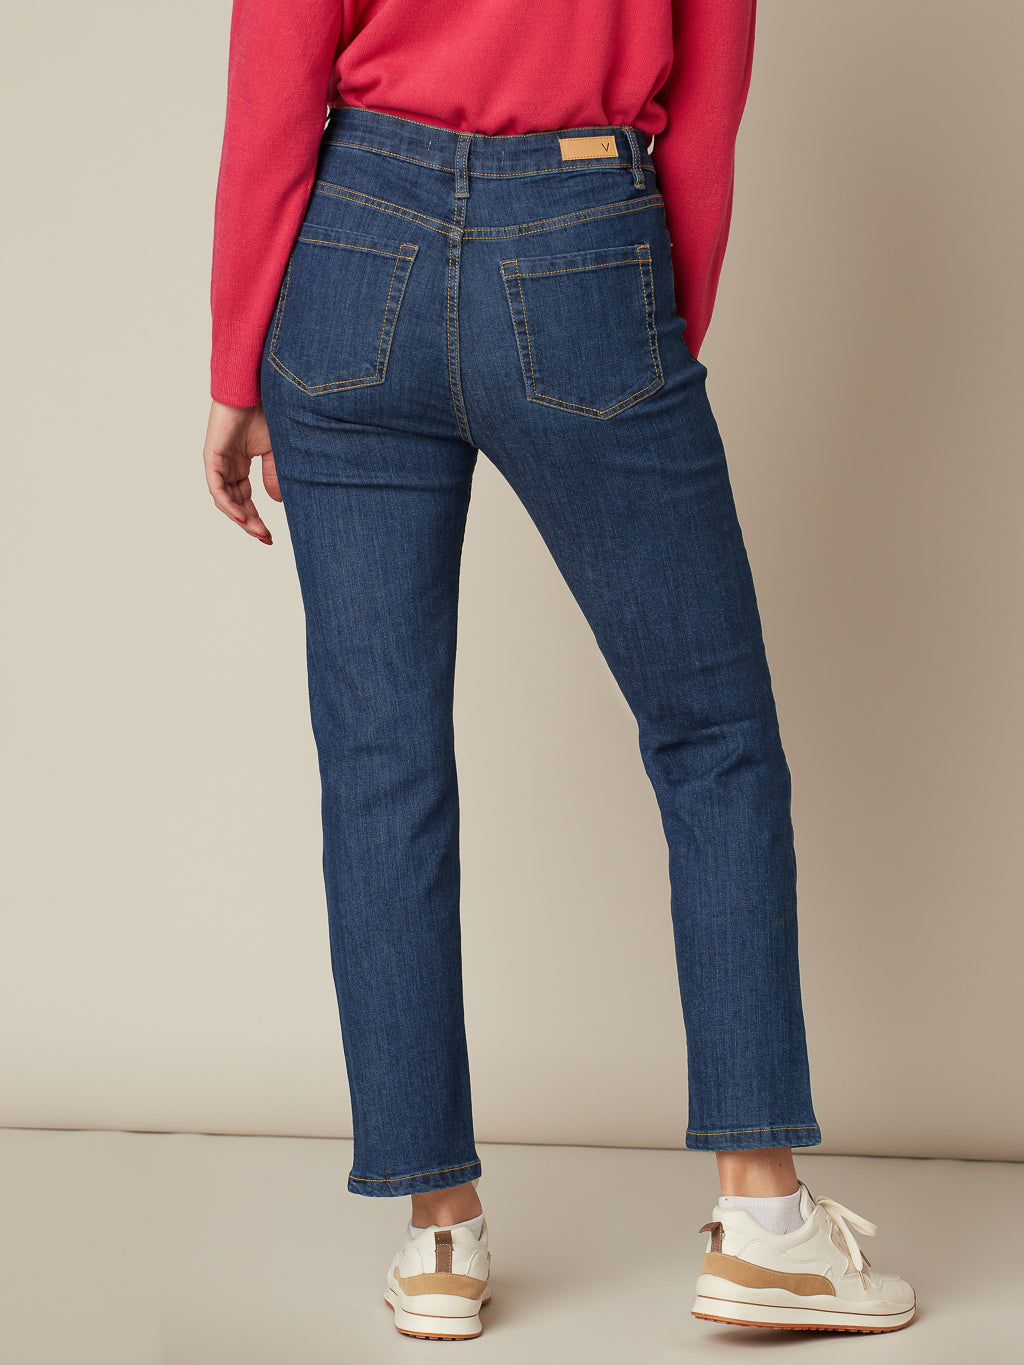 Narrow fitted jean